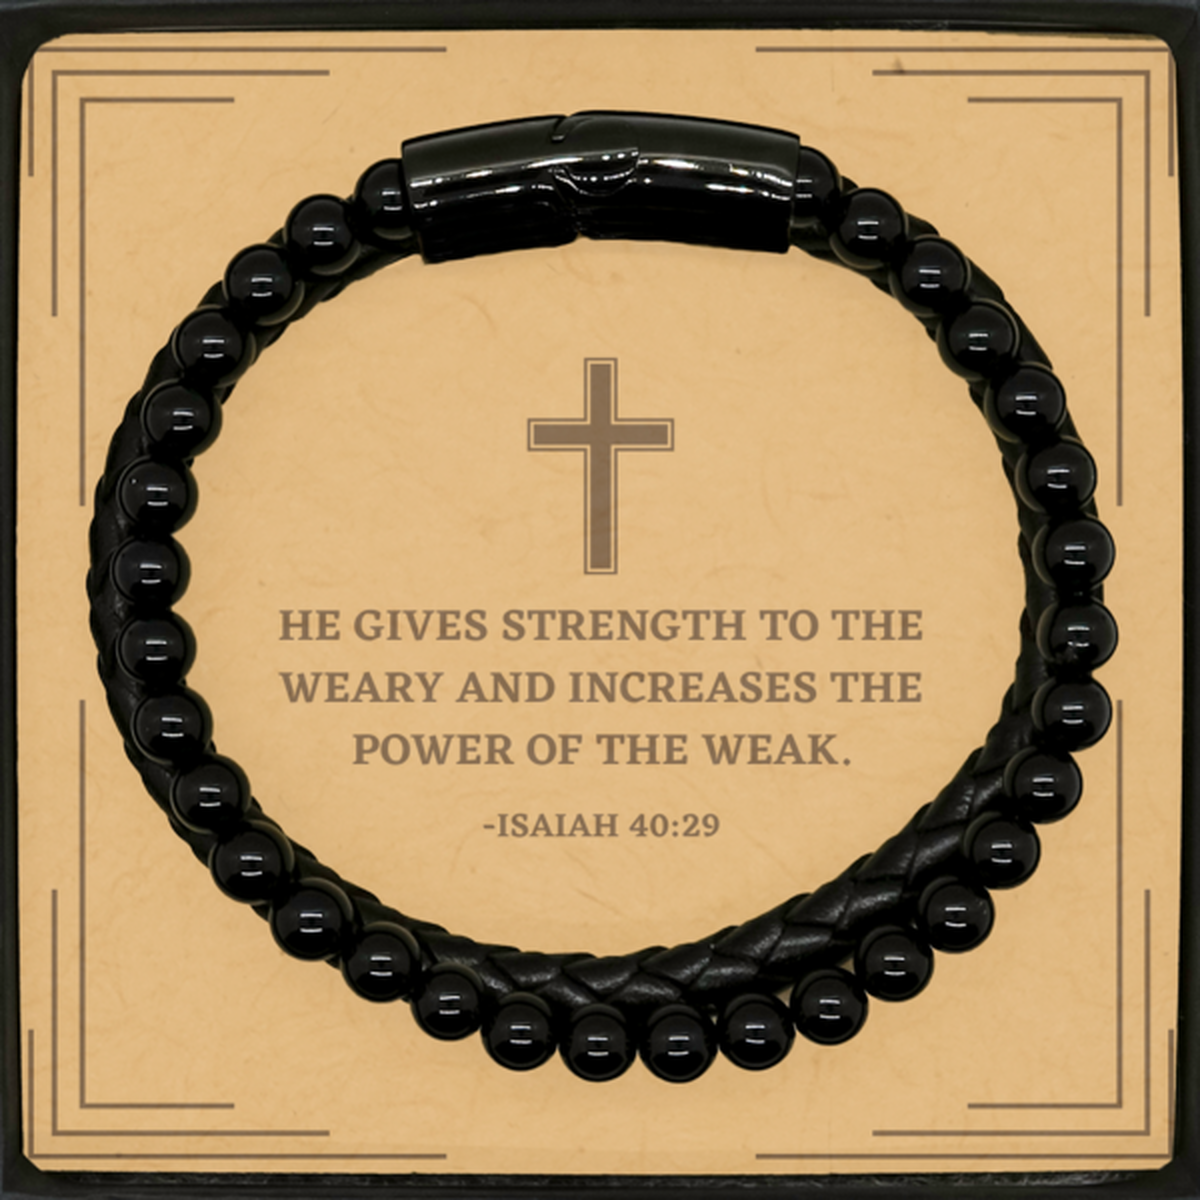 Baptism Gifts For Teenage Boys Girls, Christian Bible Verse Stone Leather Bracelet, He gives strength to the weary, Confirmation Gifts, Bible Verse Card for Son, Godson, Grandson